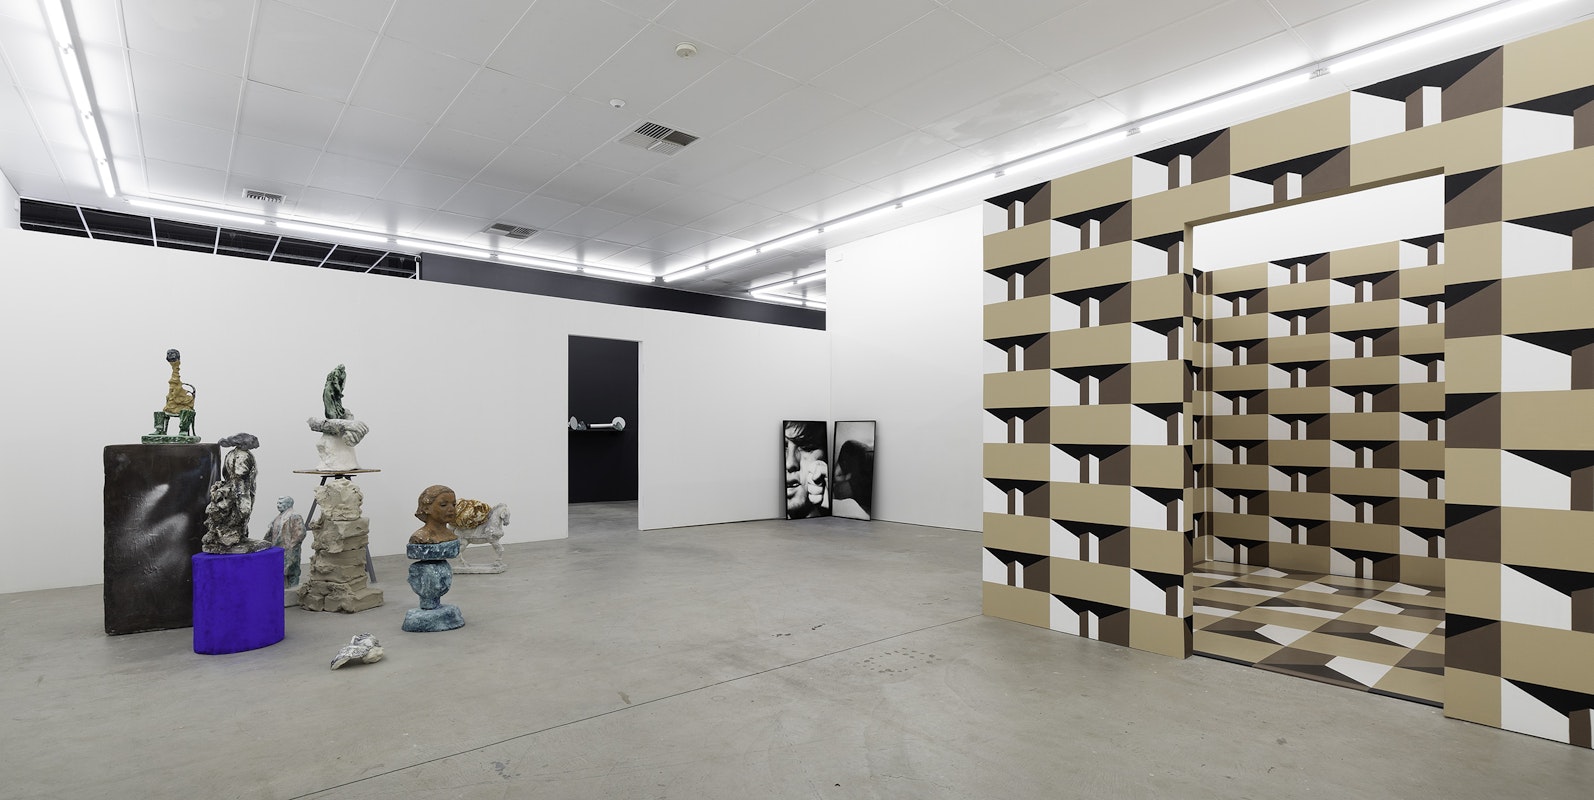 Installation view of Gertrude Studios 2022, curated by Tim Riley Walsh, featuring work by Nina Sanadze, Justin Balmain and Narelle Desmond at Gertrude Contemporary. Photo: Christian Capurro.